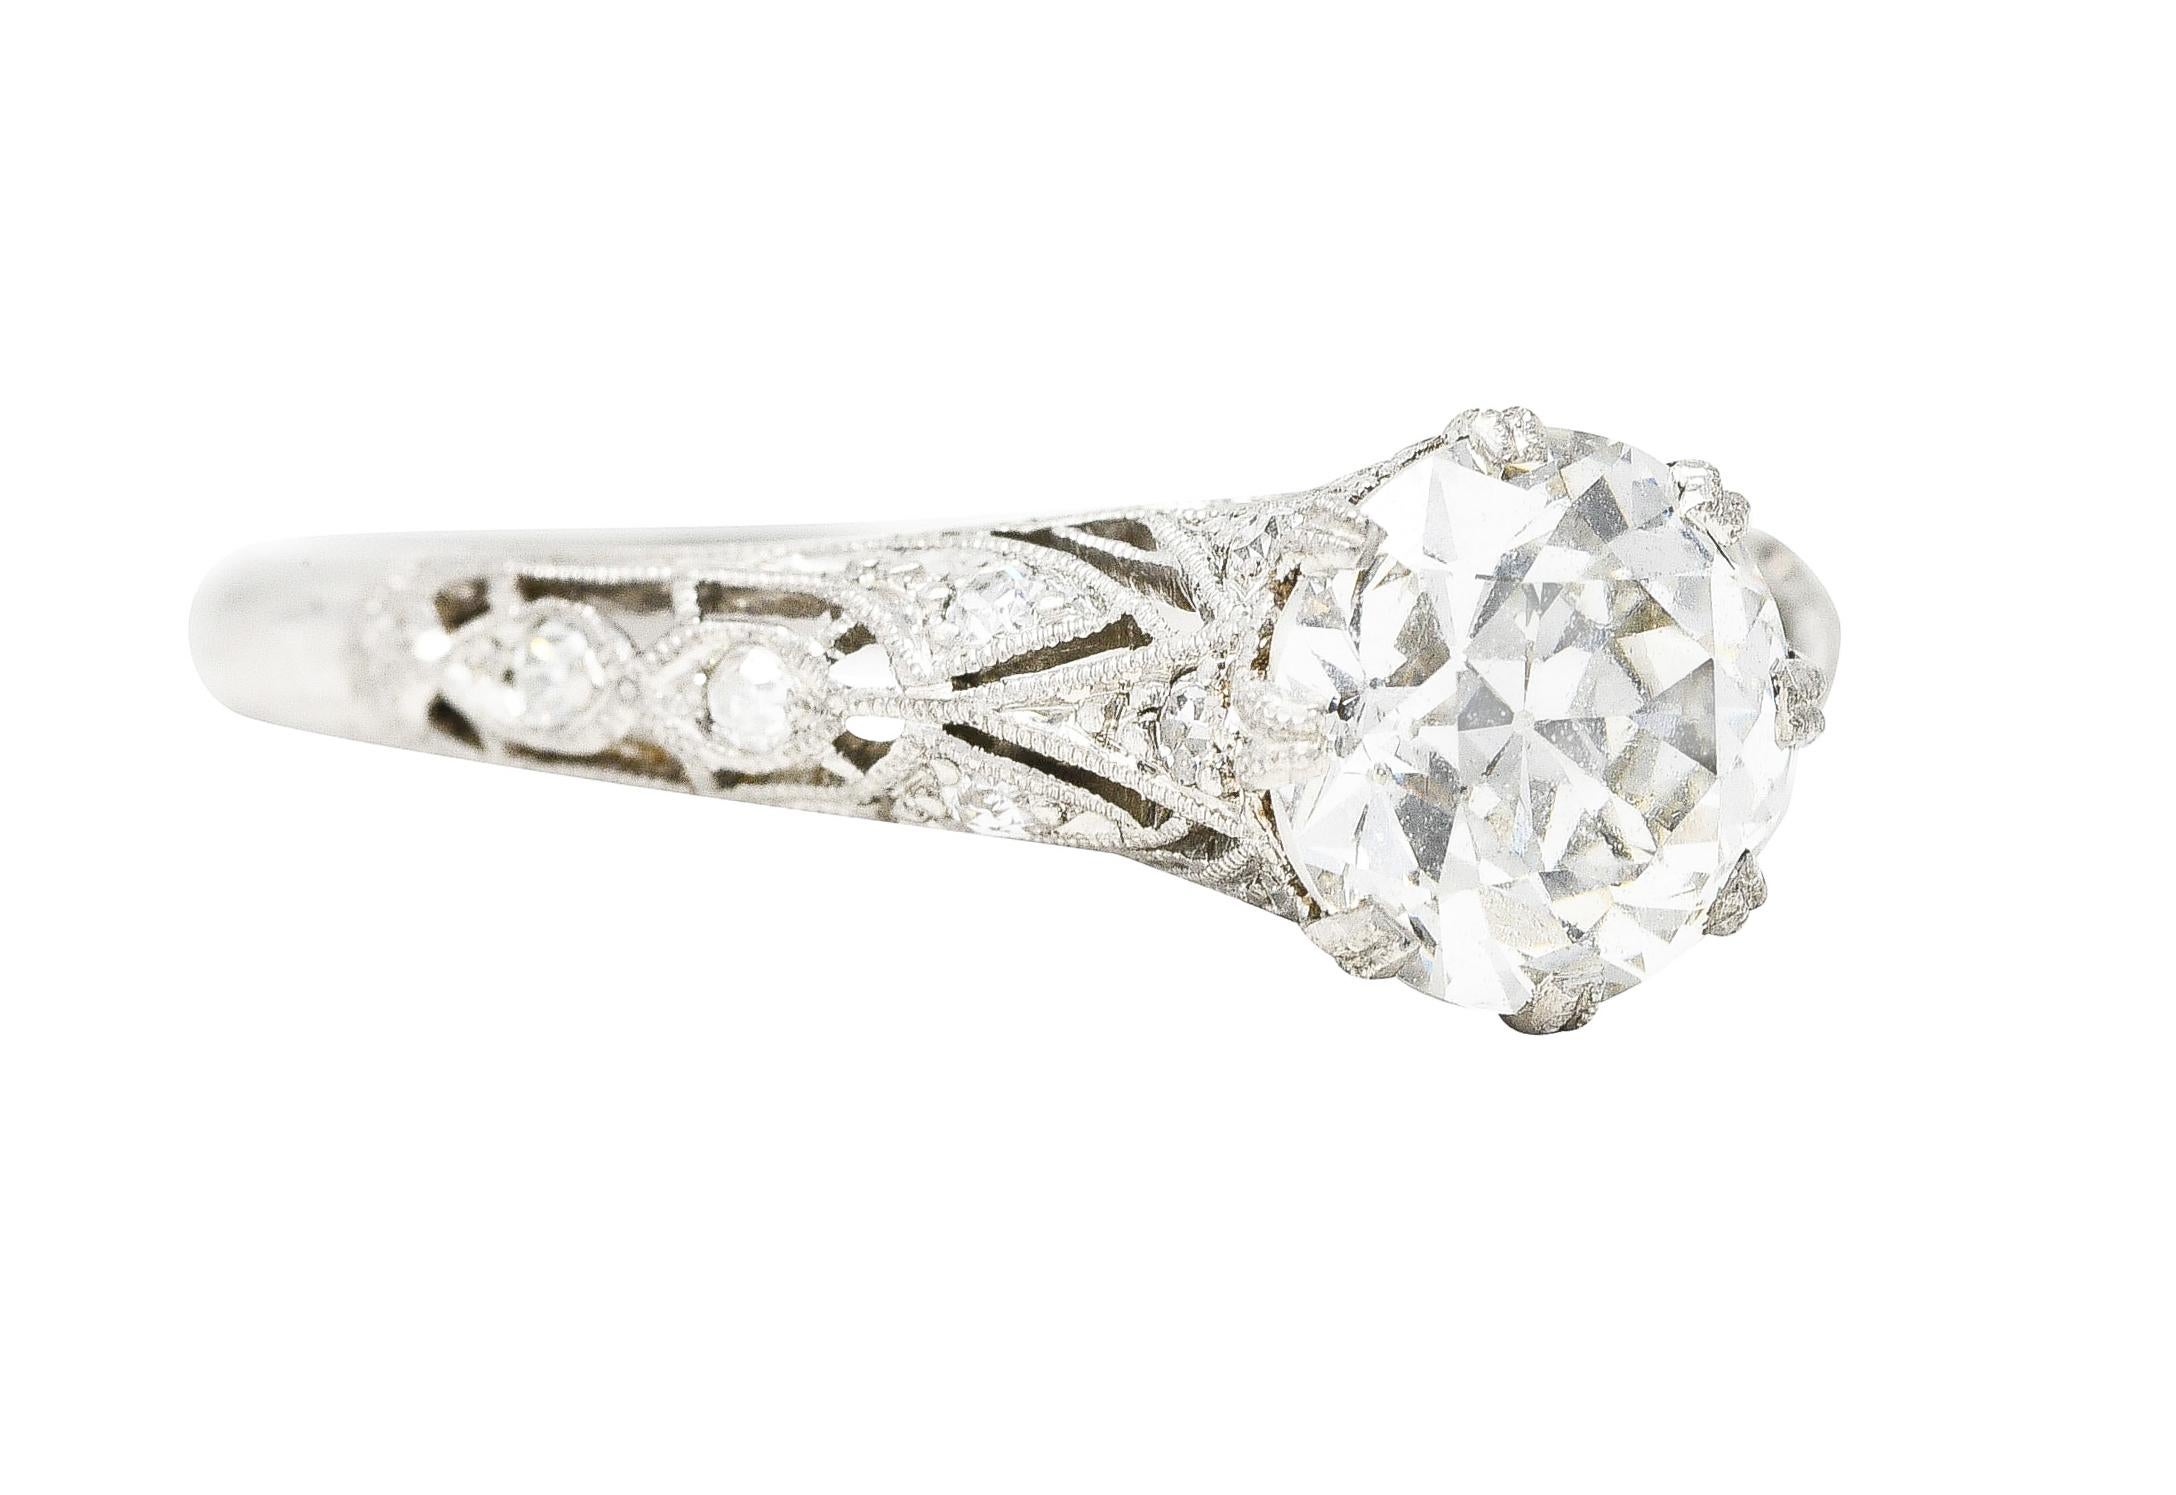 Centering an old European cut diamond weighing 1.20 carats total - I color with VS2 clarity. Prong set by eight milgrain prongs with an intricate pierced trellis surround and marquis shoulders. Featuring single cut diamonds bead set throughout with